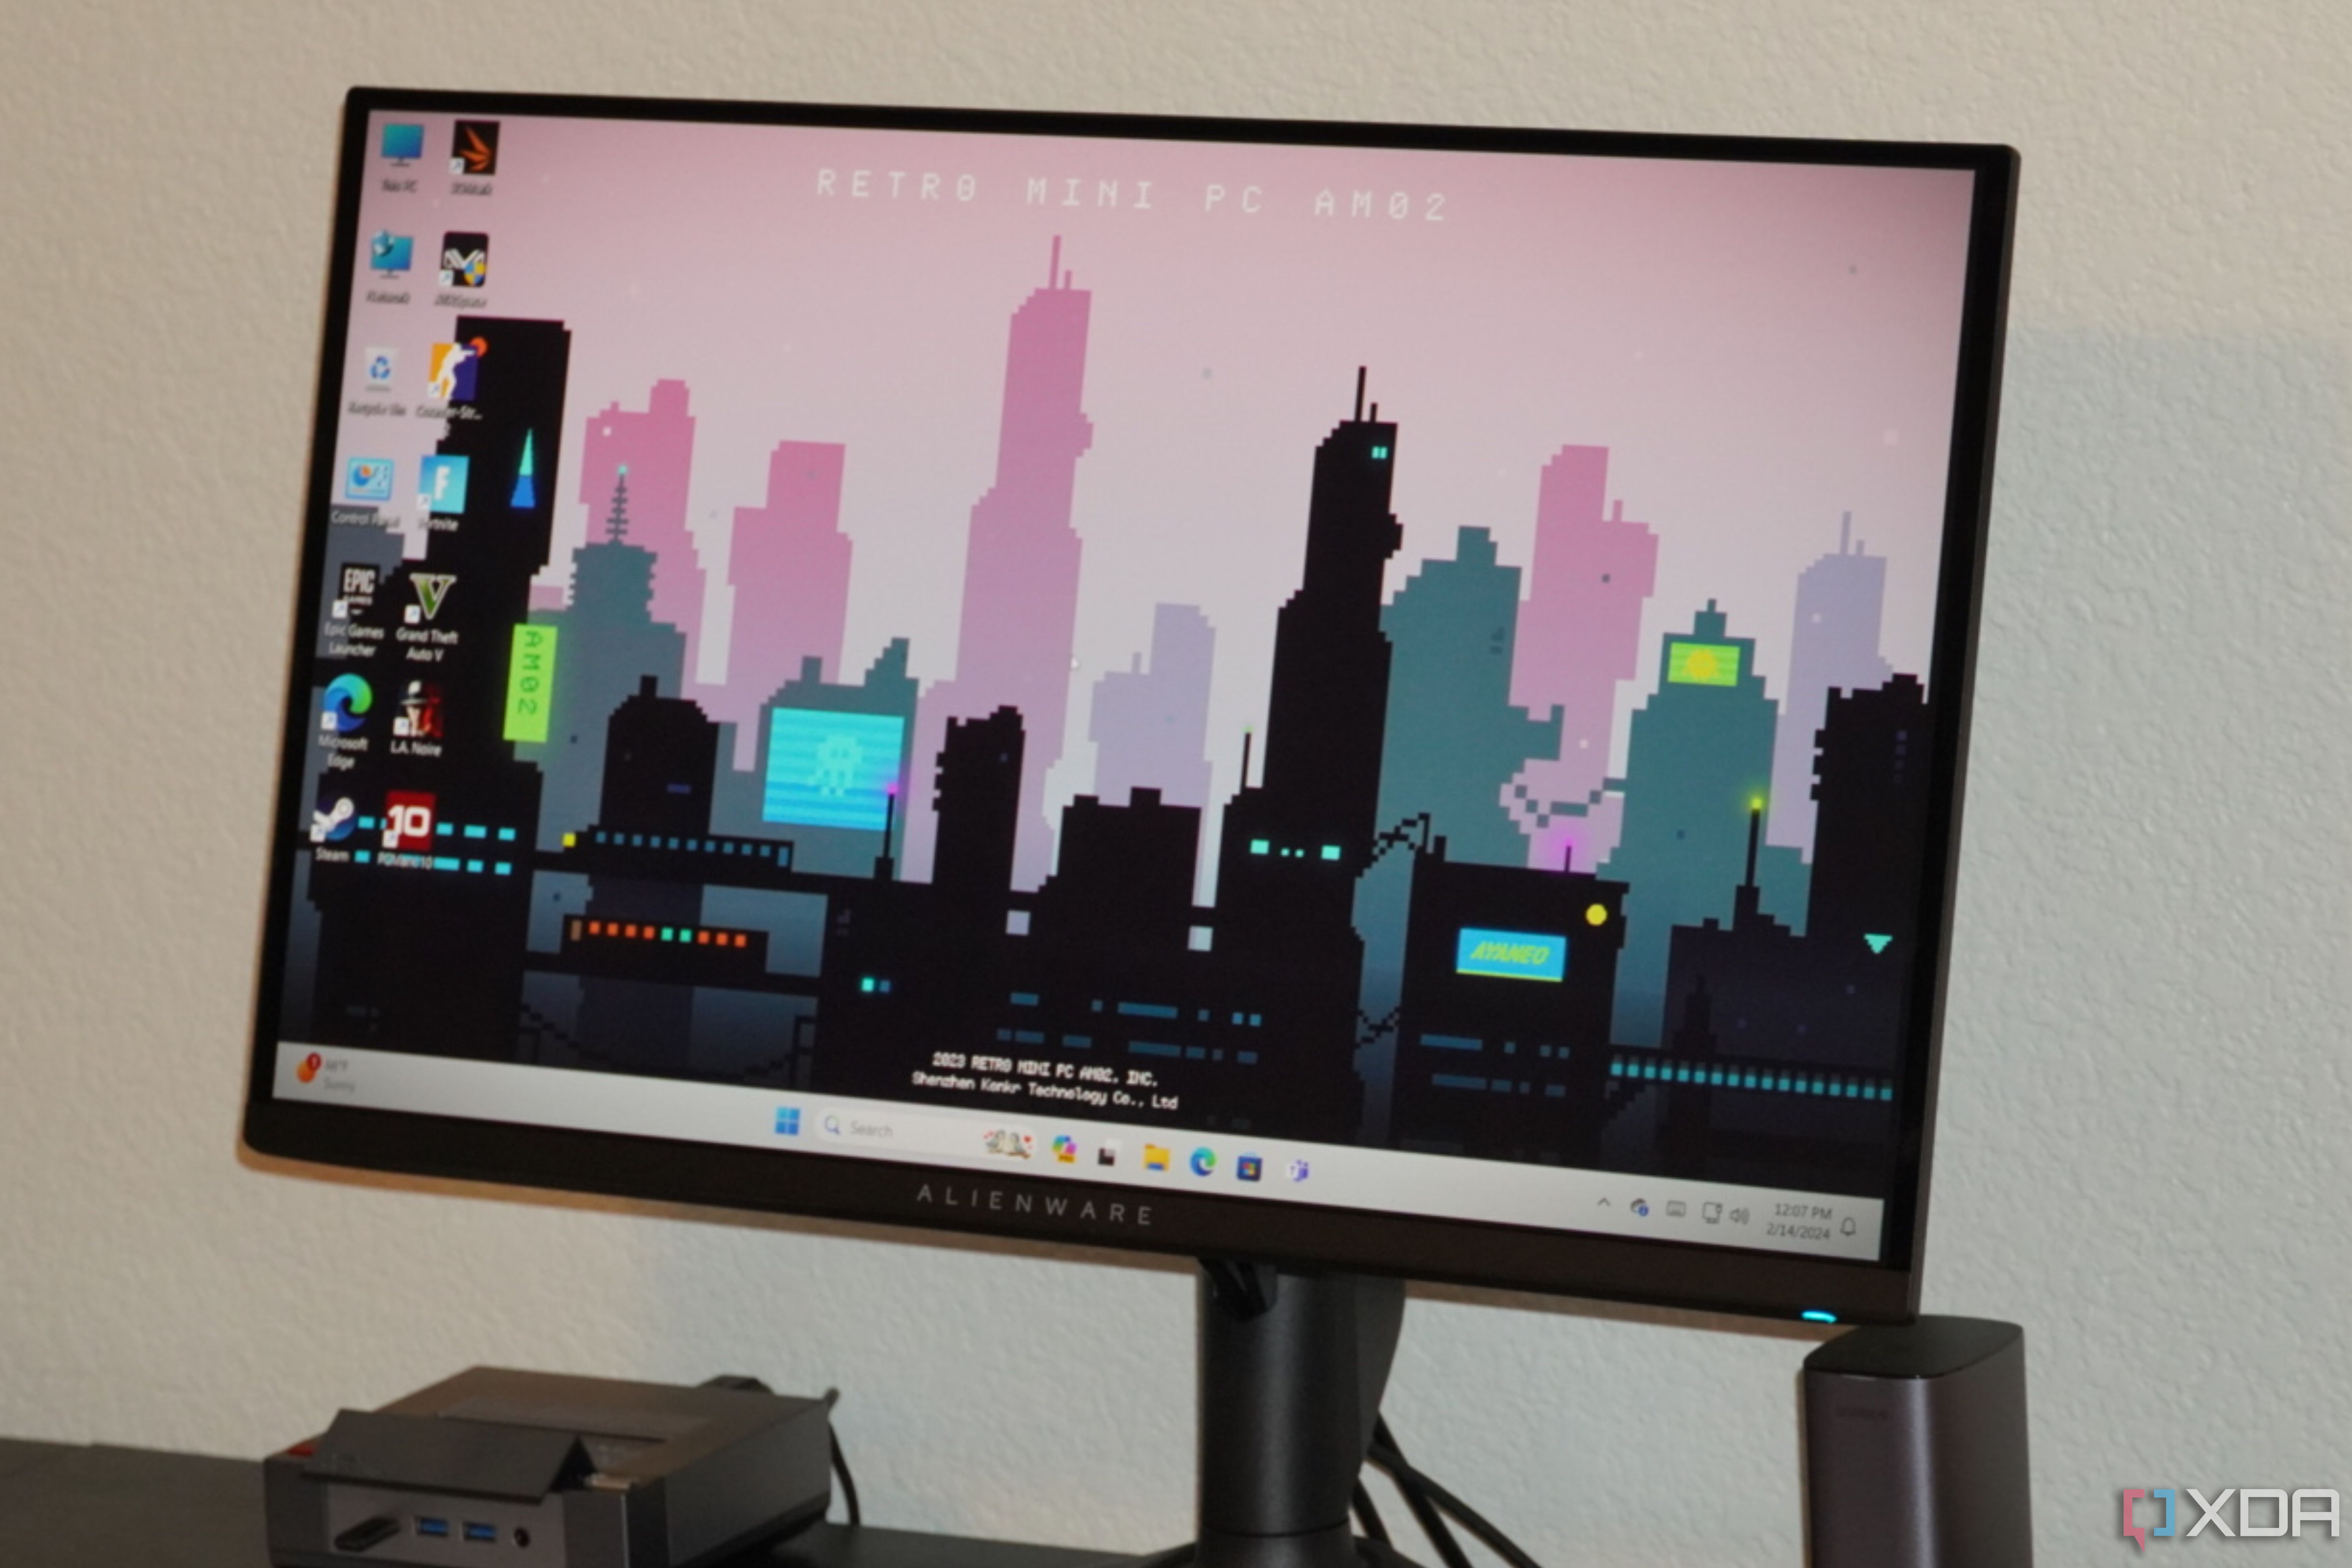 The Alienware QD OLED monitor on the Home Screen.